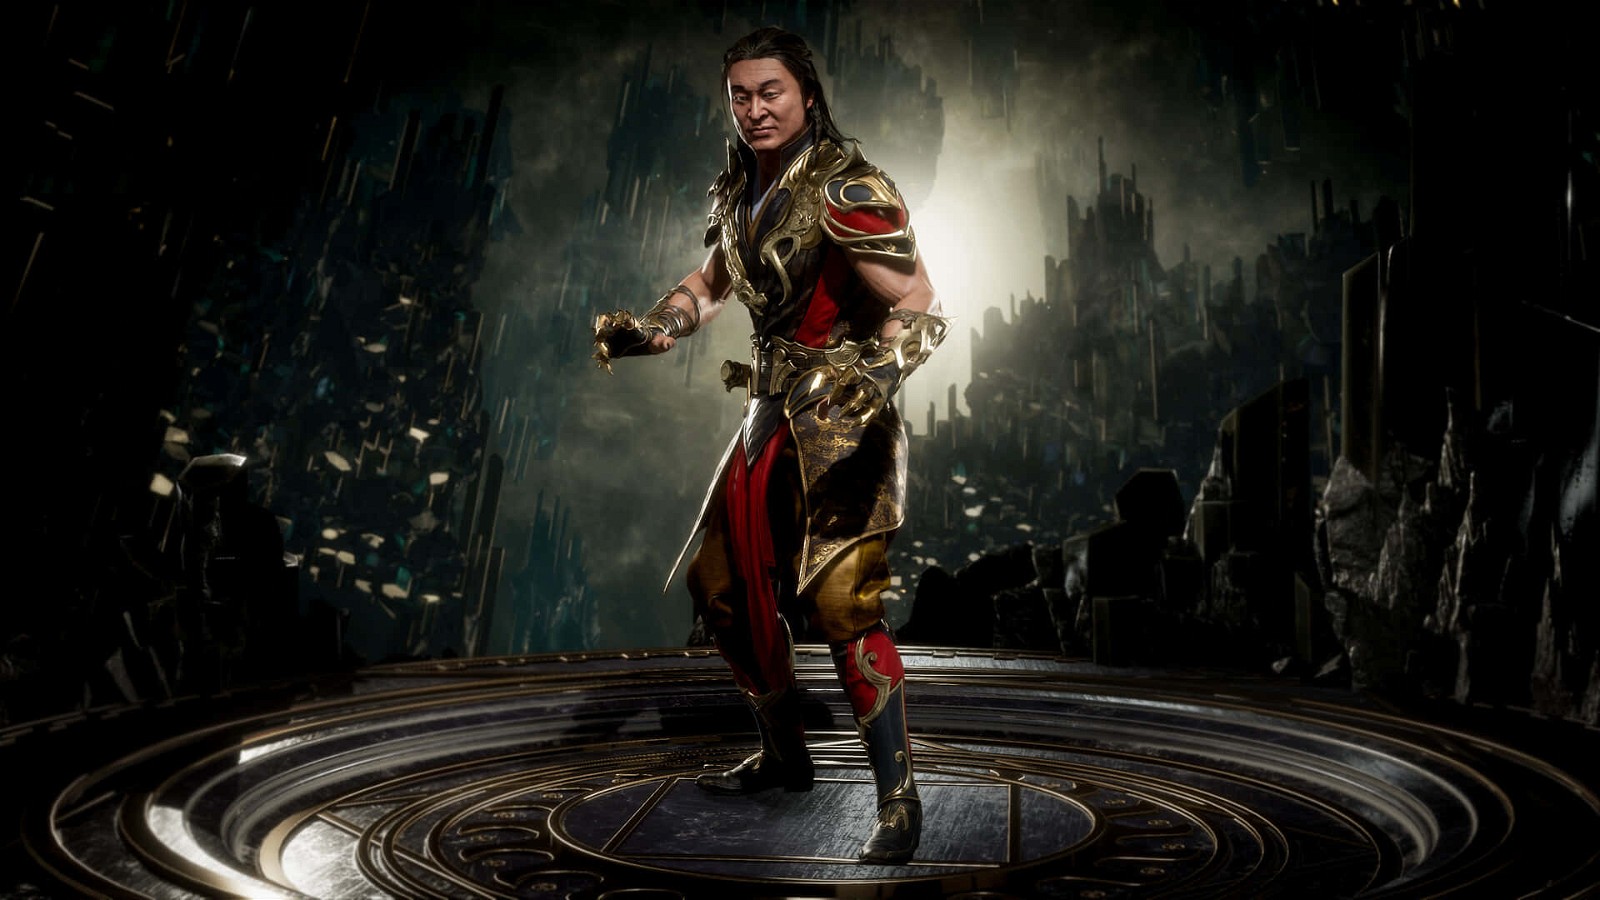 Shang Tsung: The classic Mortal Kombat 1 villain with a cunning demeanor and a collection of deadly magic.